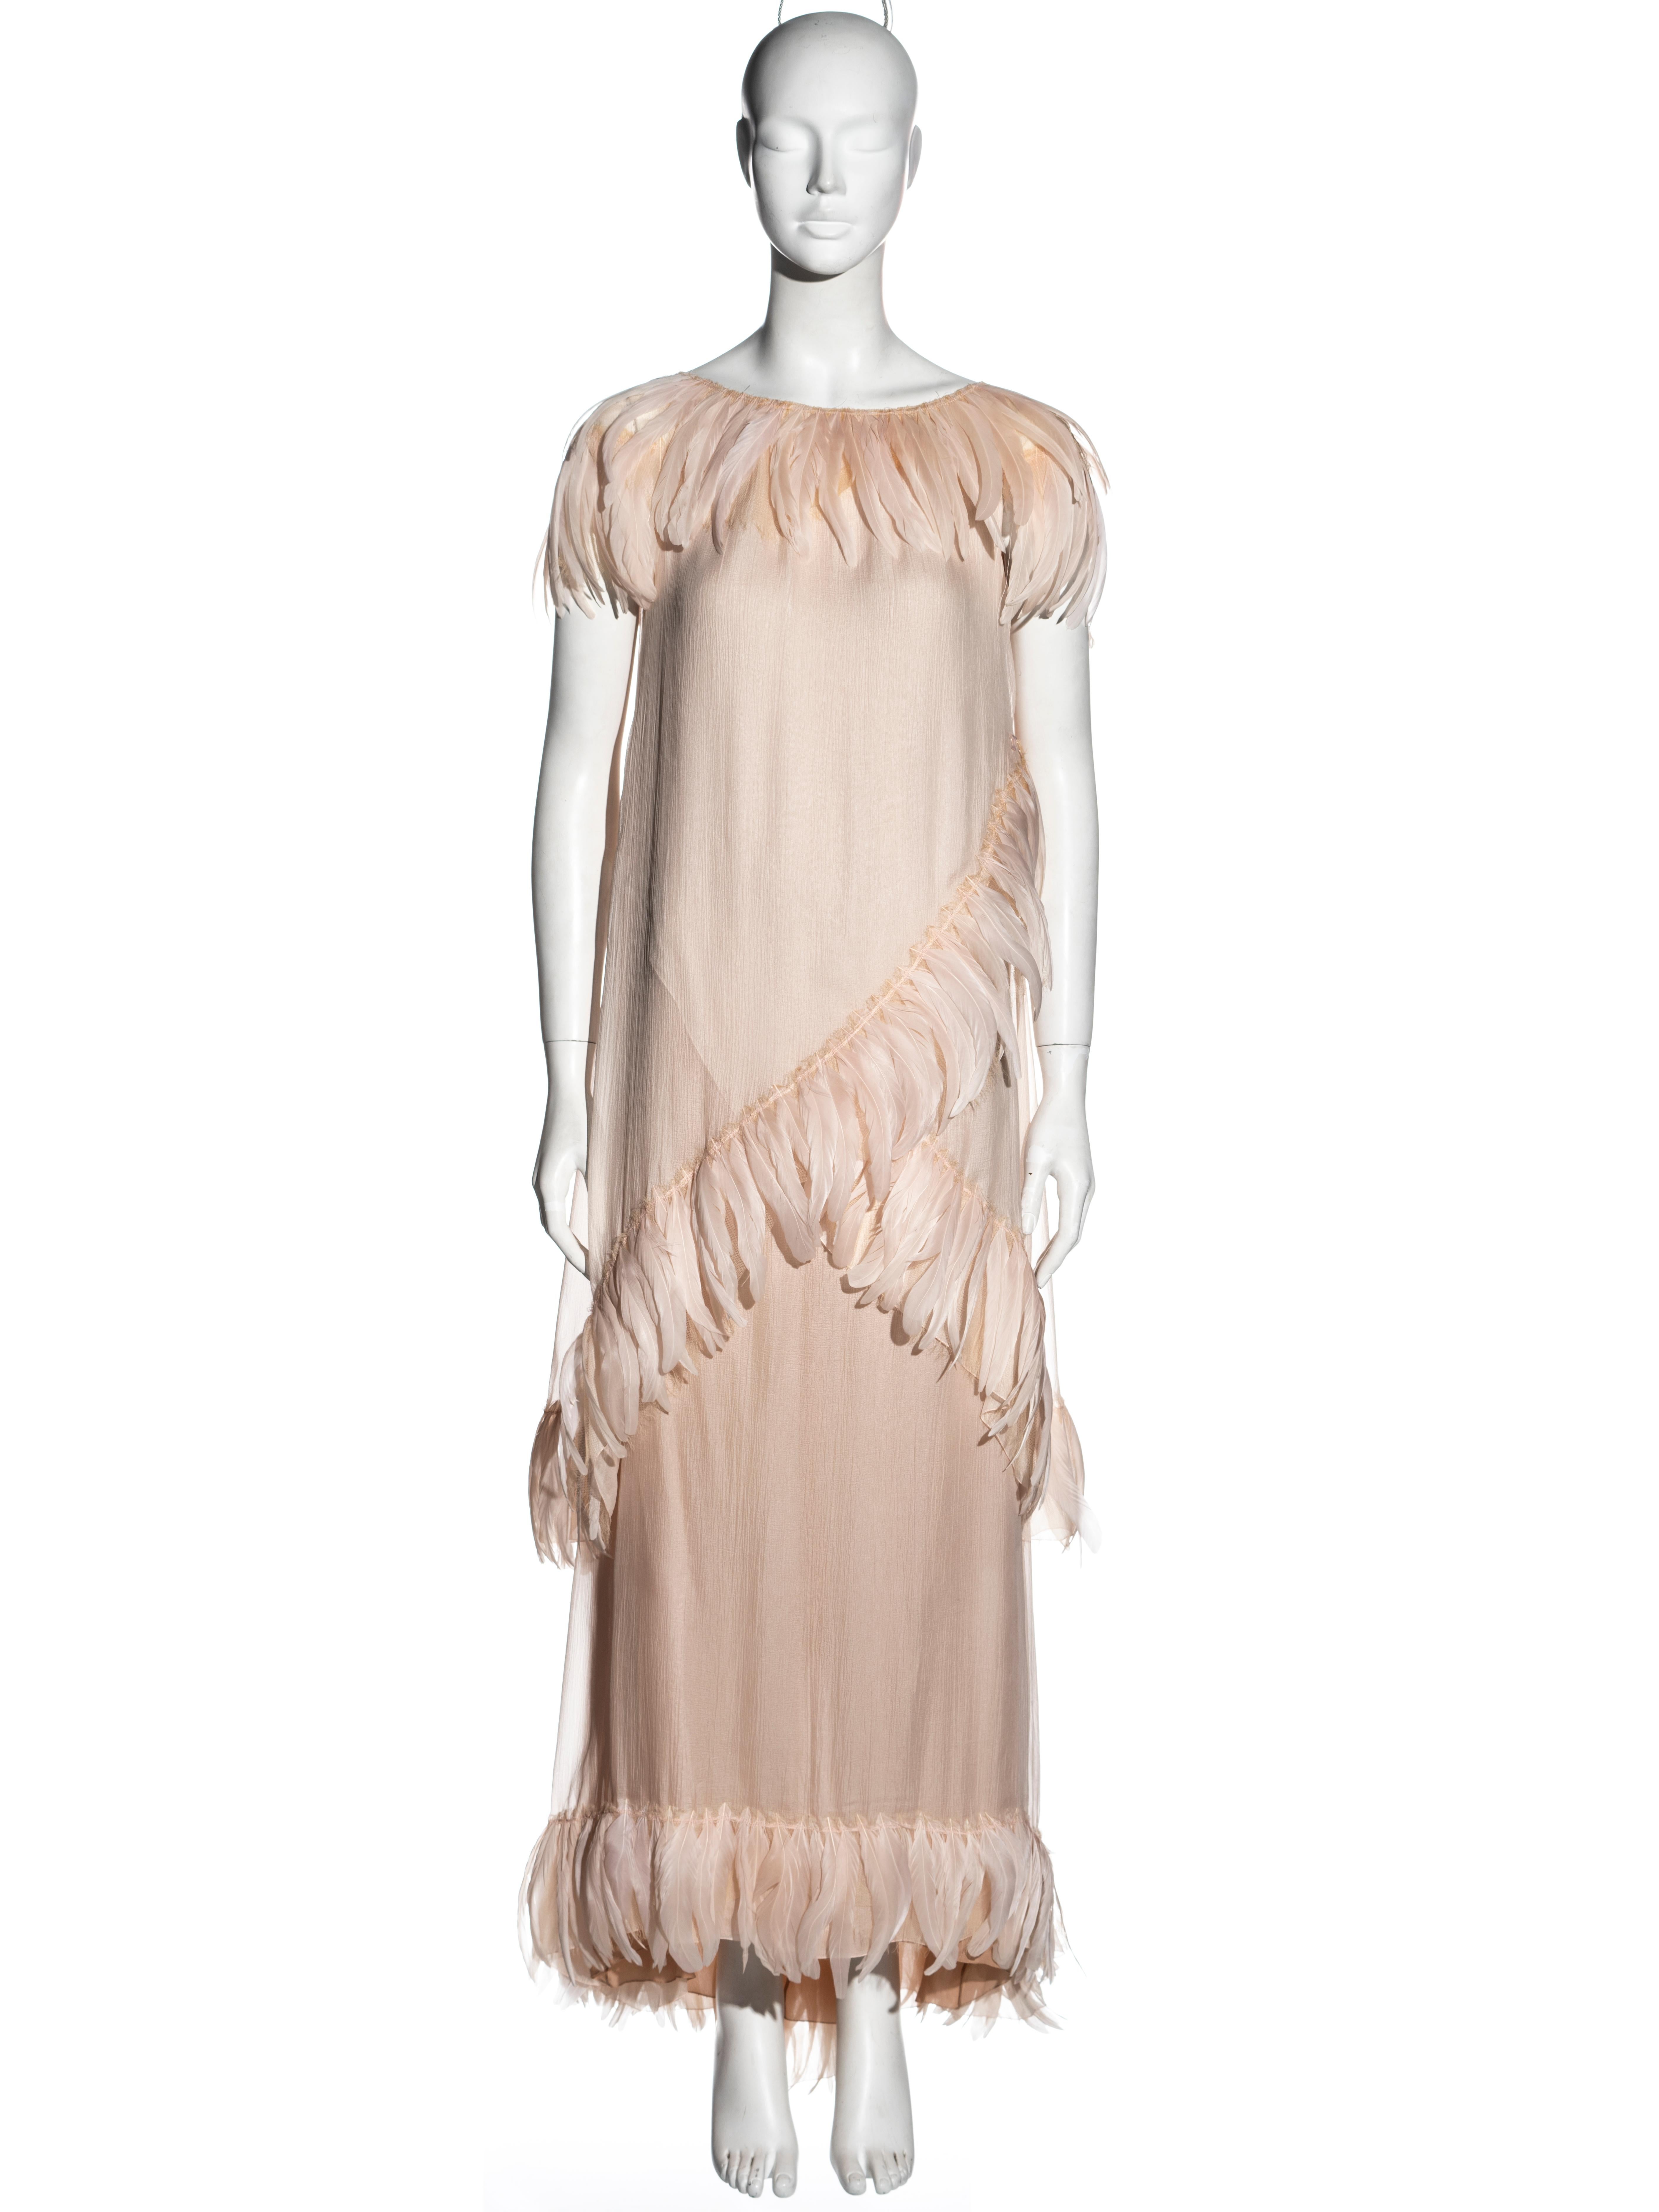 ▪ Chanel evening dress
▪ Designed by Karl Lagerfeld 
▪ Ivory silk chiffon 
▪ Rooster feather trim 
▪ Loose fit
▪ FR 36 - UK 8 - US 4
▪ Cruise 2009
▪ 100% Silk
▪ Made in France